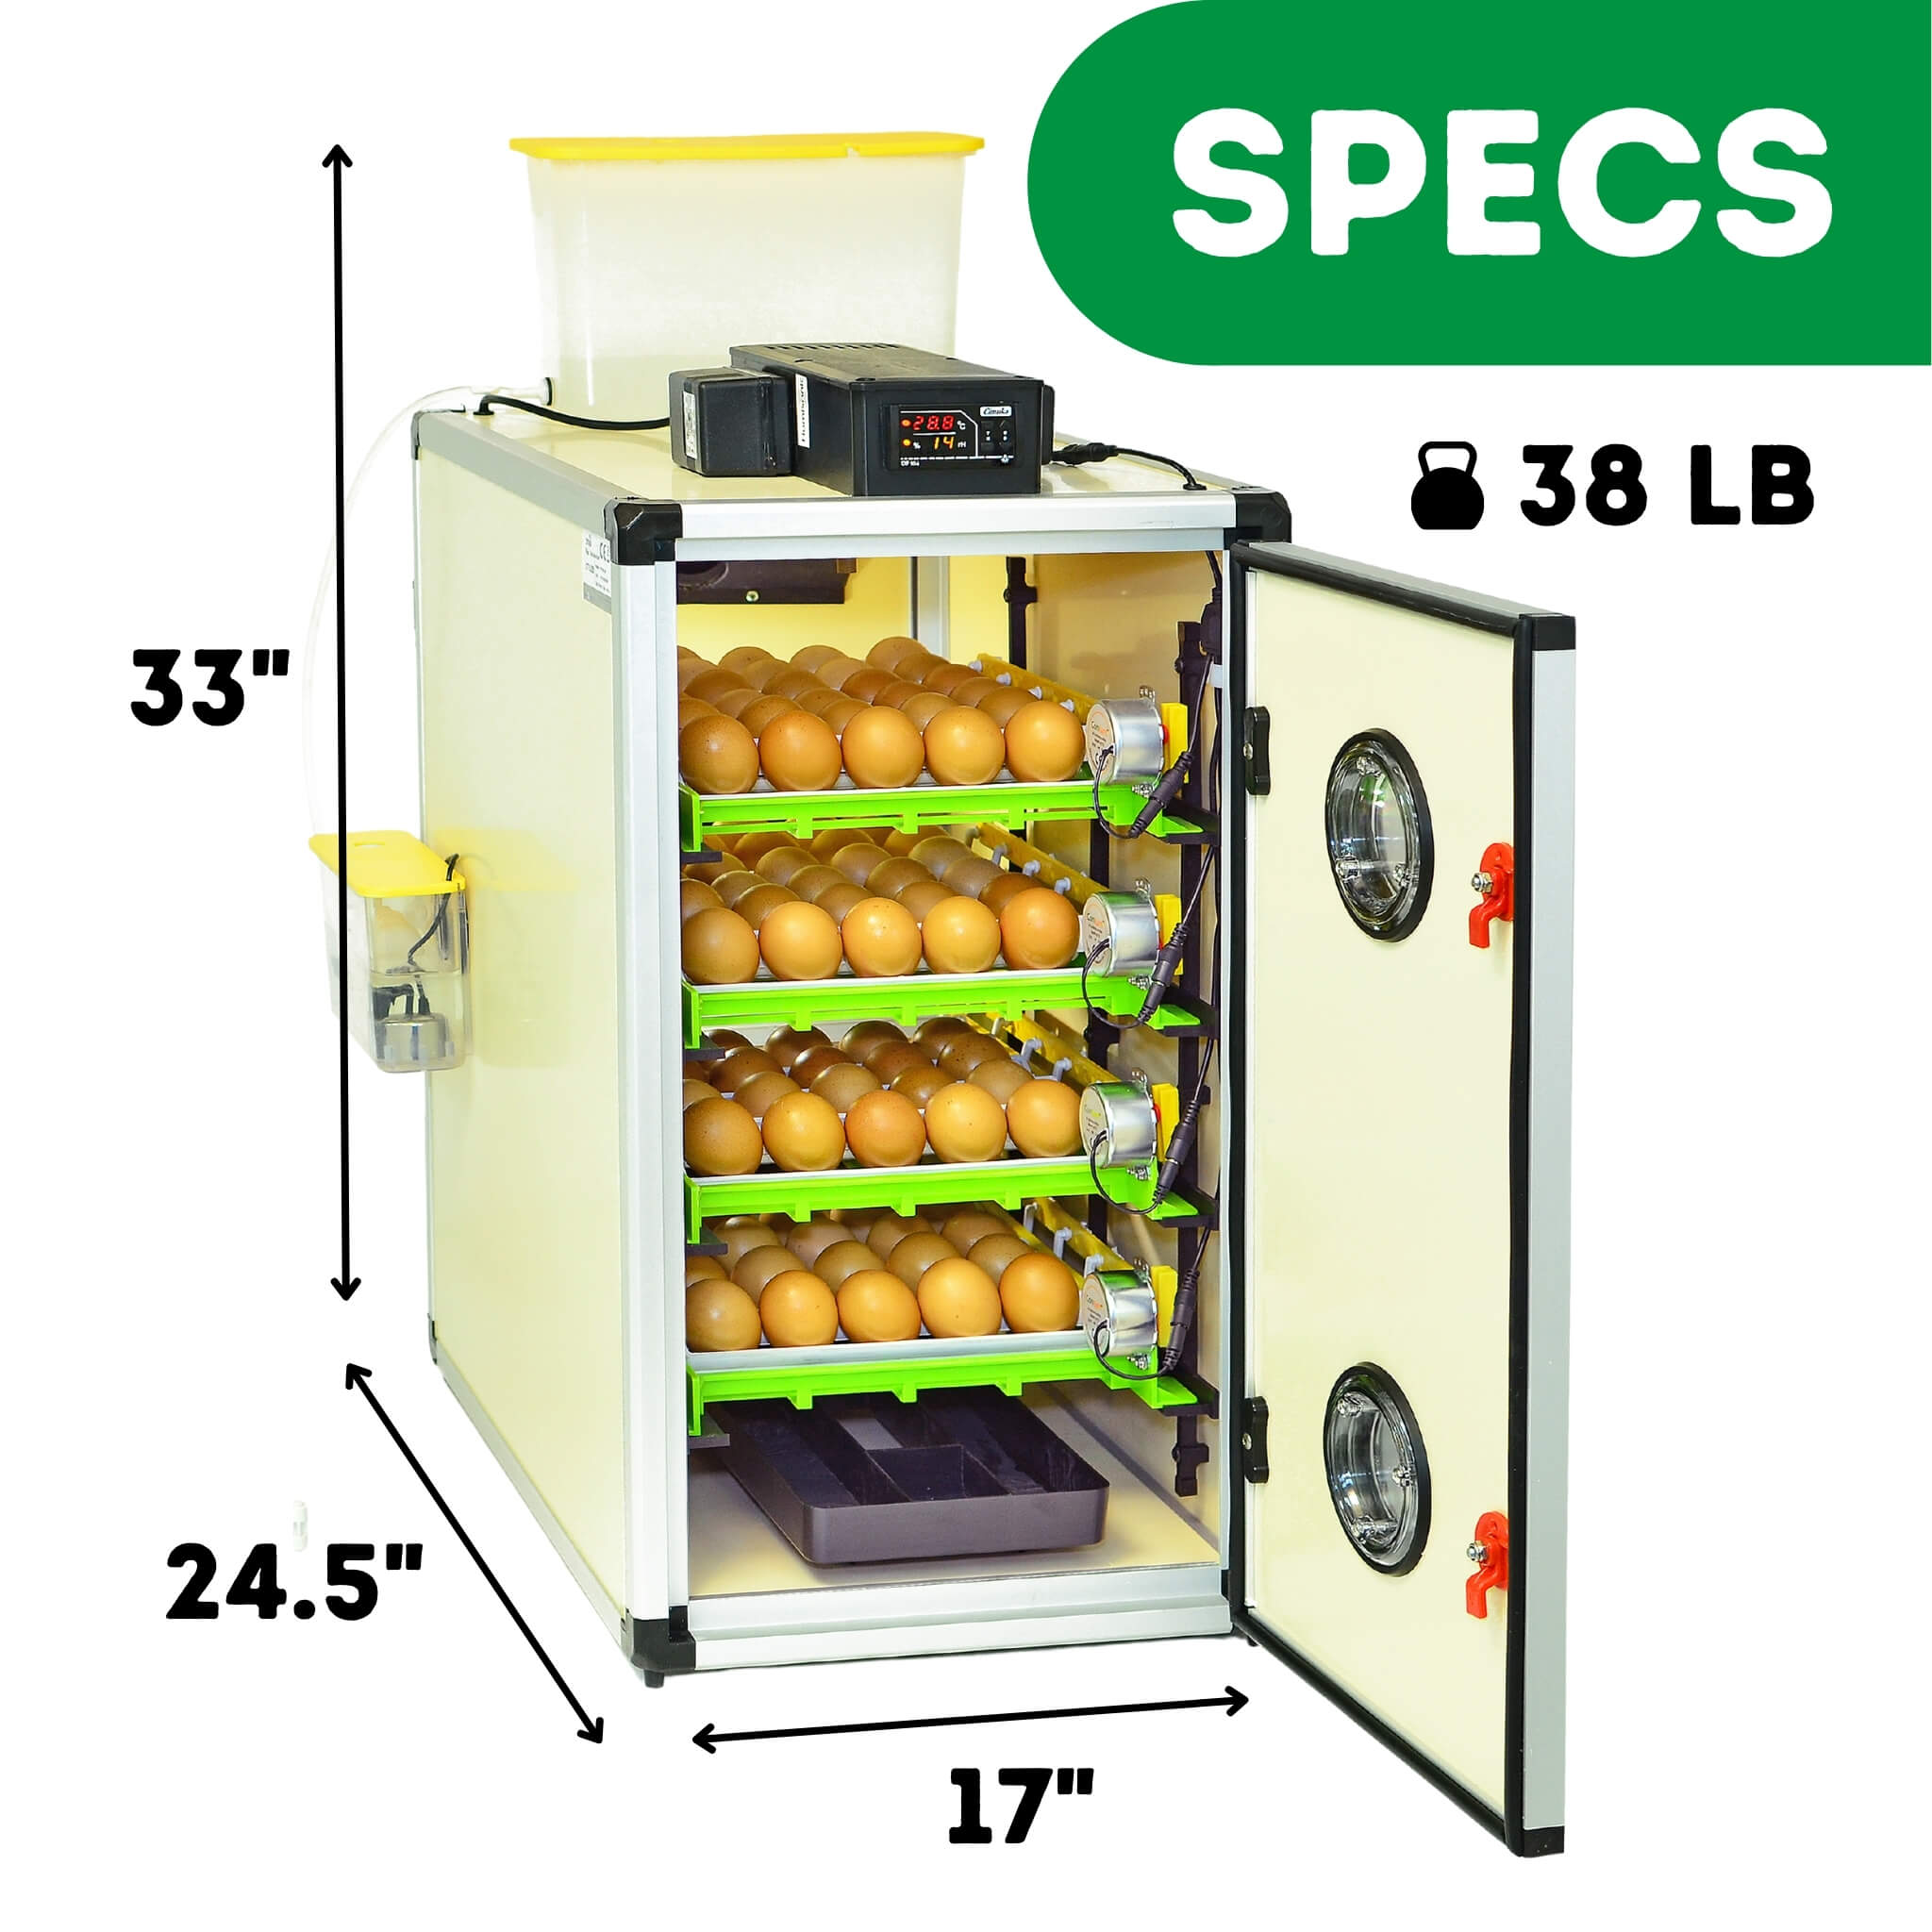 Hatching Time Cimuka CT120 Incubator. Infographic showing specifications of incubator. CT120 can be seen in image measuring 33 inches tall, 24.5 inches deep and 17 inches wide and weighing 38 pounds. Incubator is open, showing 4 egg setting trays full of brown chicken eggs, digital control can be seen on top of the incubator in front of water reservoir tank that is connected to Humisonic Humidifier.